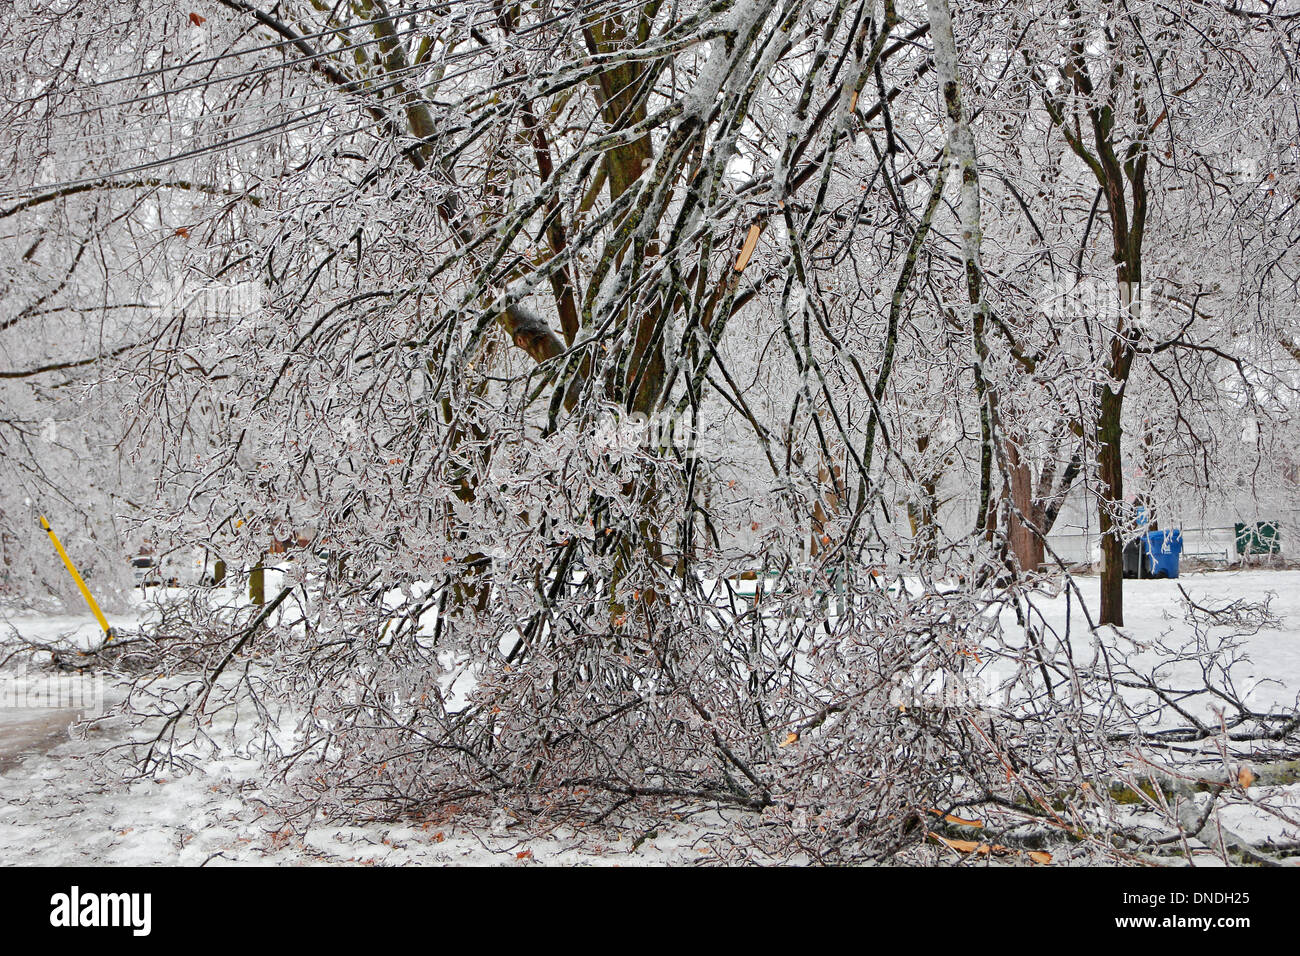 Toronto, Canada. 22nd Dec, 2013. Fallen tree branches and electrical wires tangled together as aftermath of ice storm and freezing rain. Credit:  CharlineXia/Alamy Live News Stock Photo